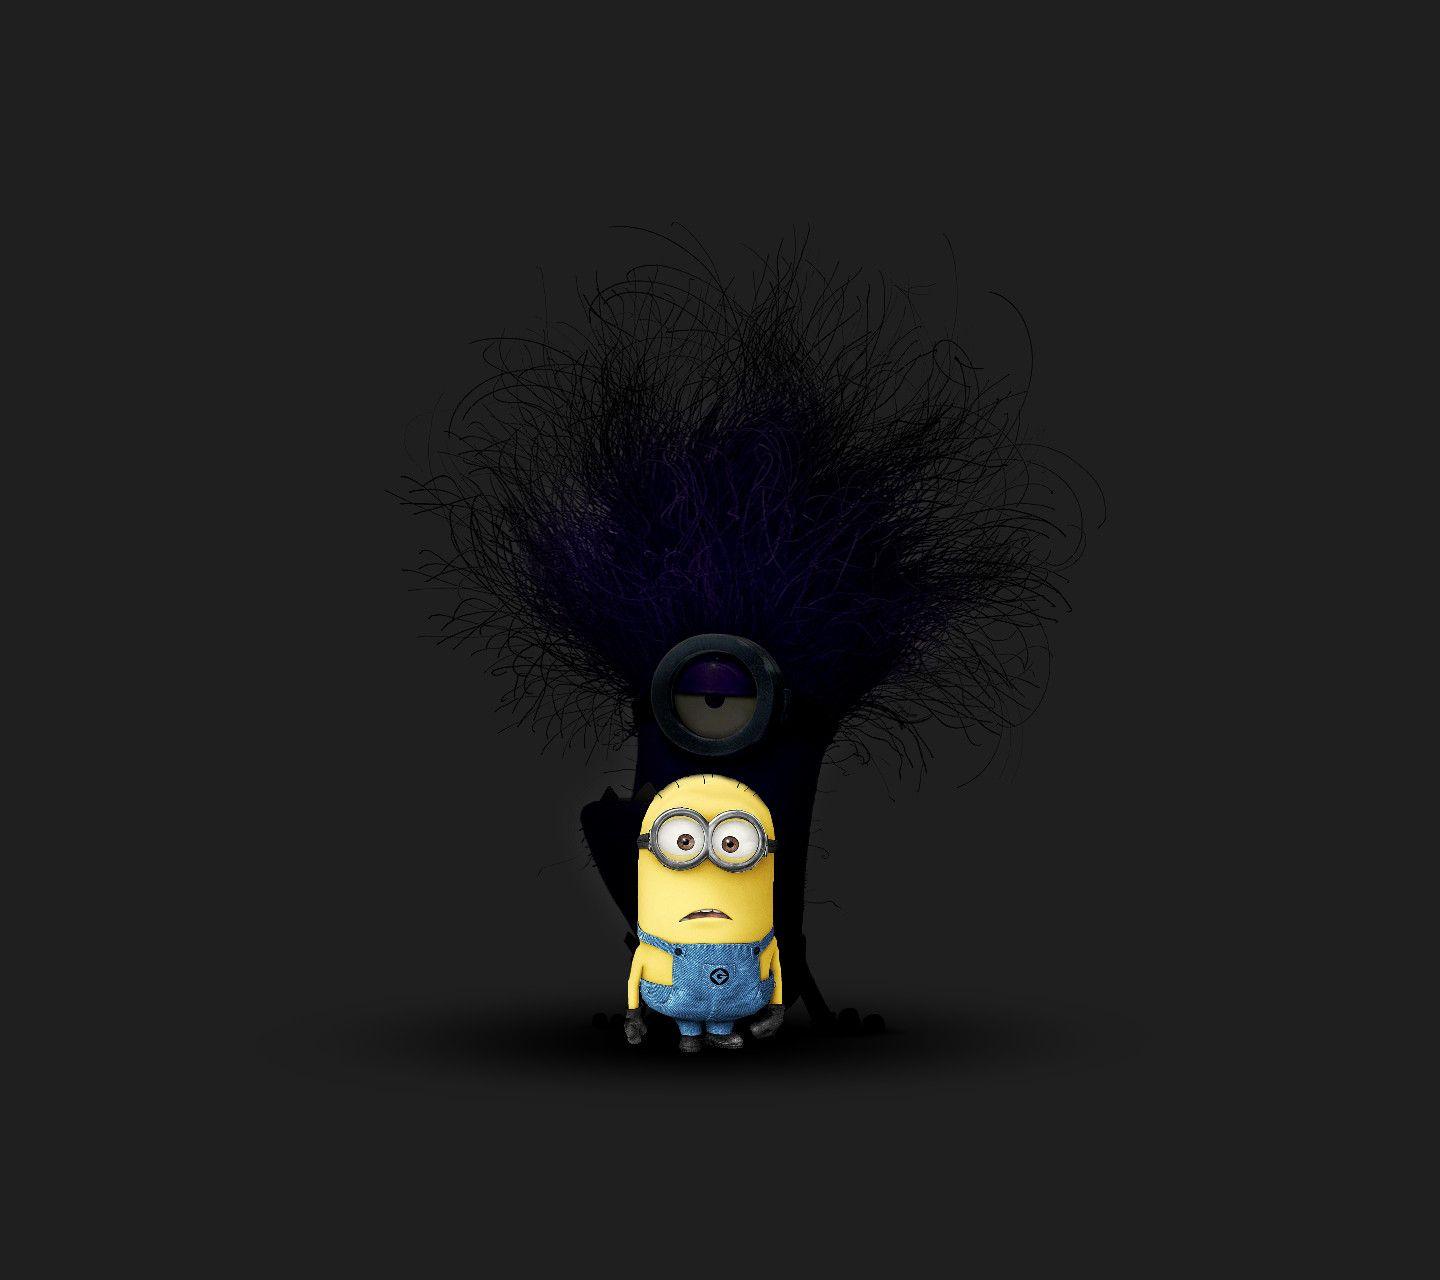 1440x1280 Despicable Me 2 Minion [X Post From IWallpaper] : Hình nền